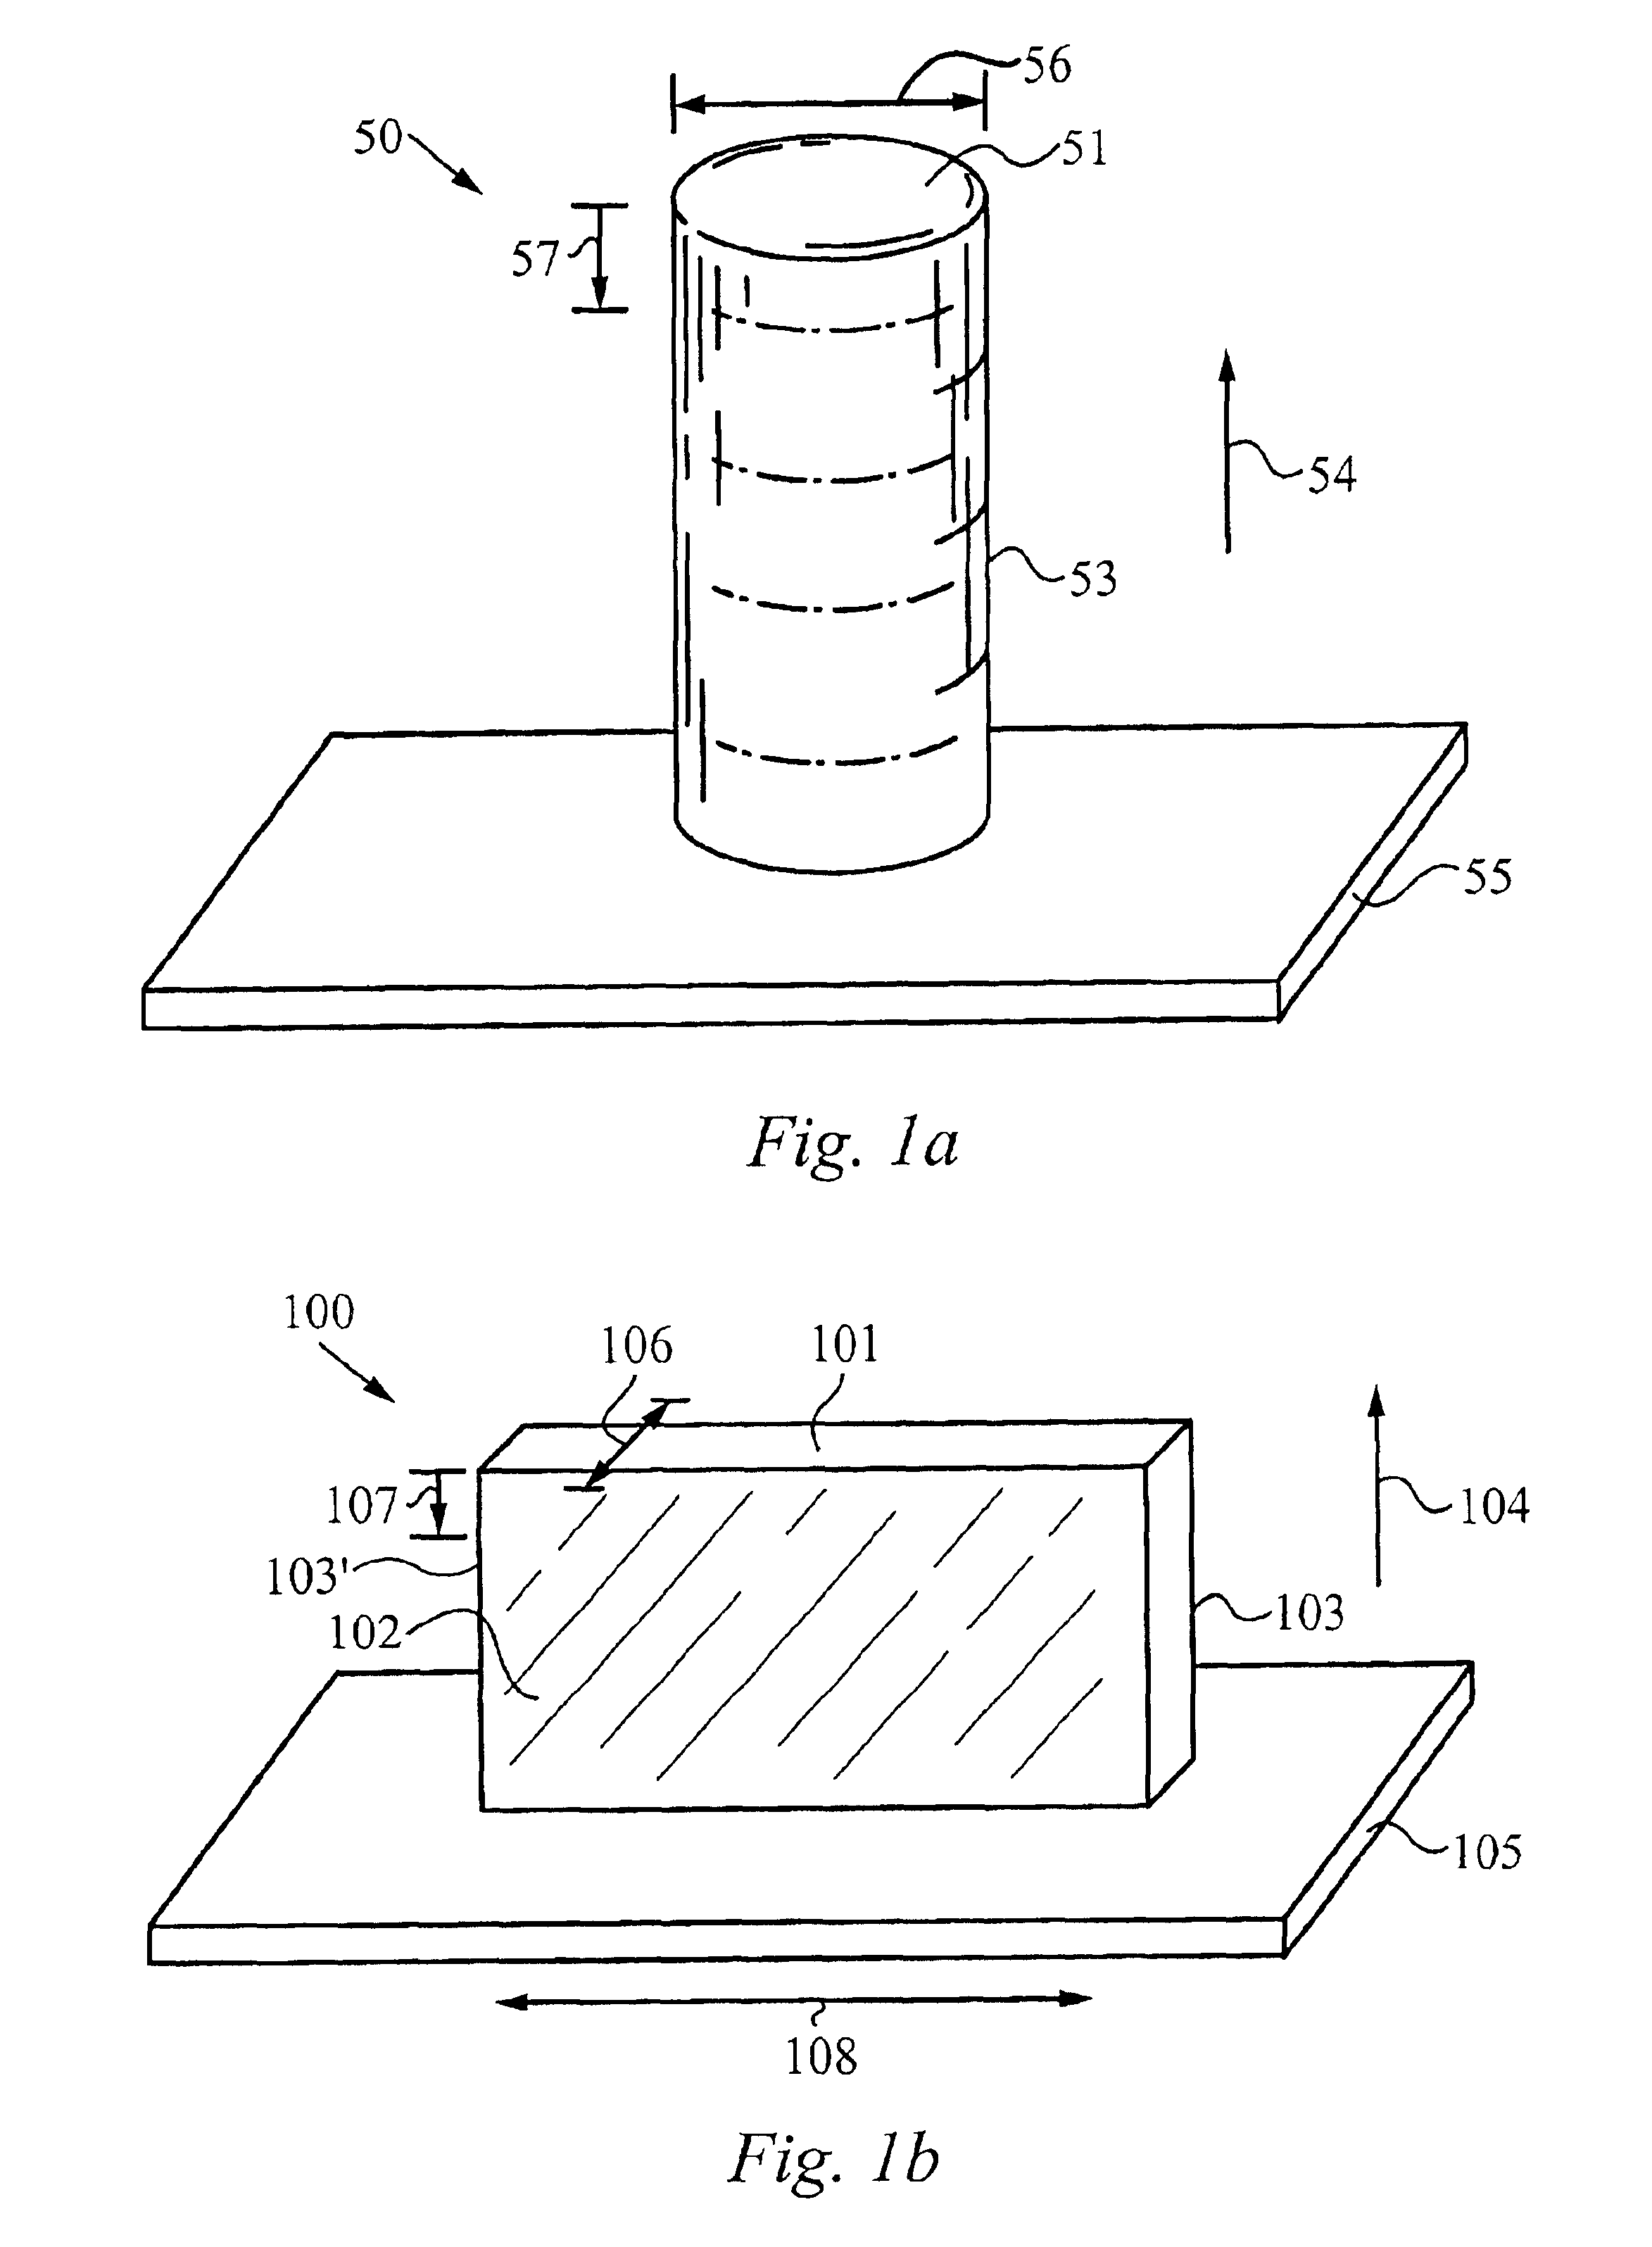 Device with multi-structural contact elements